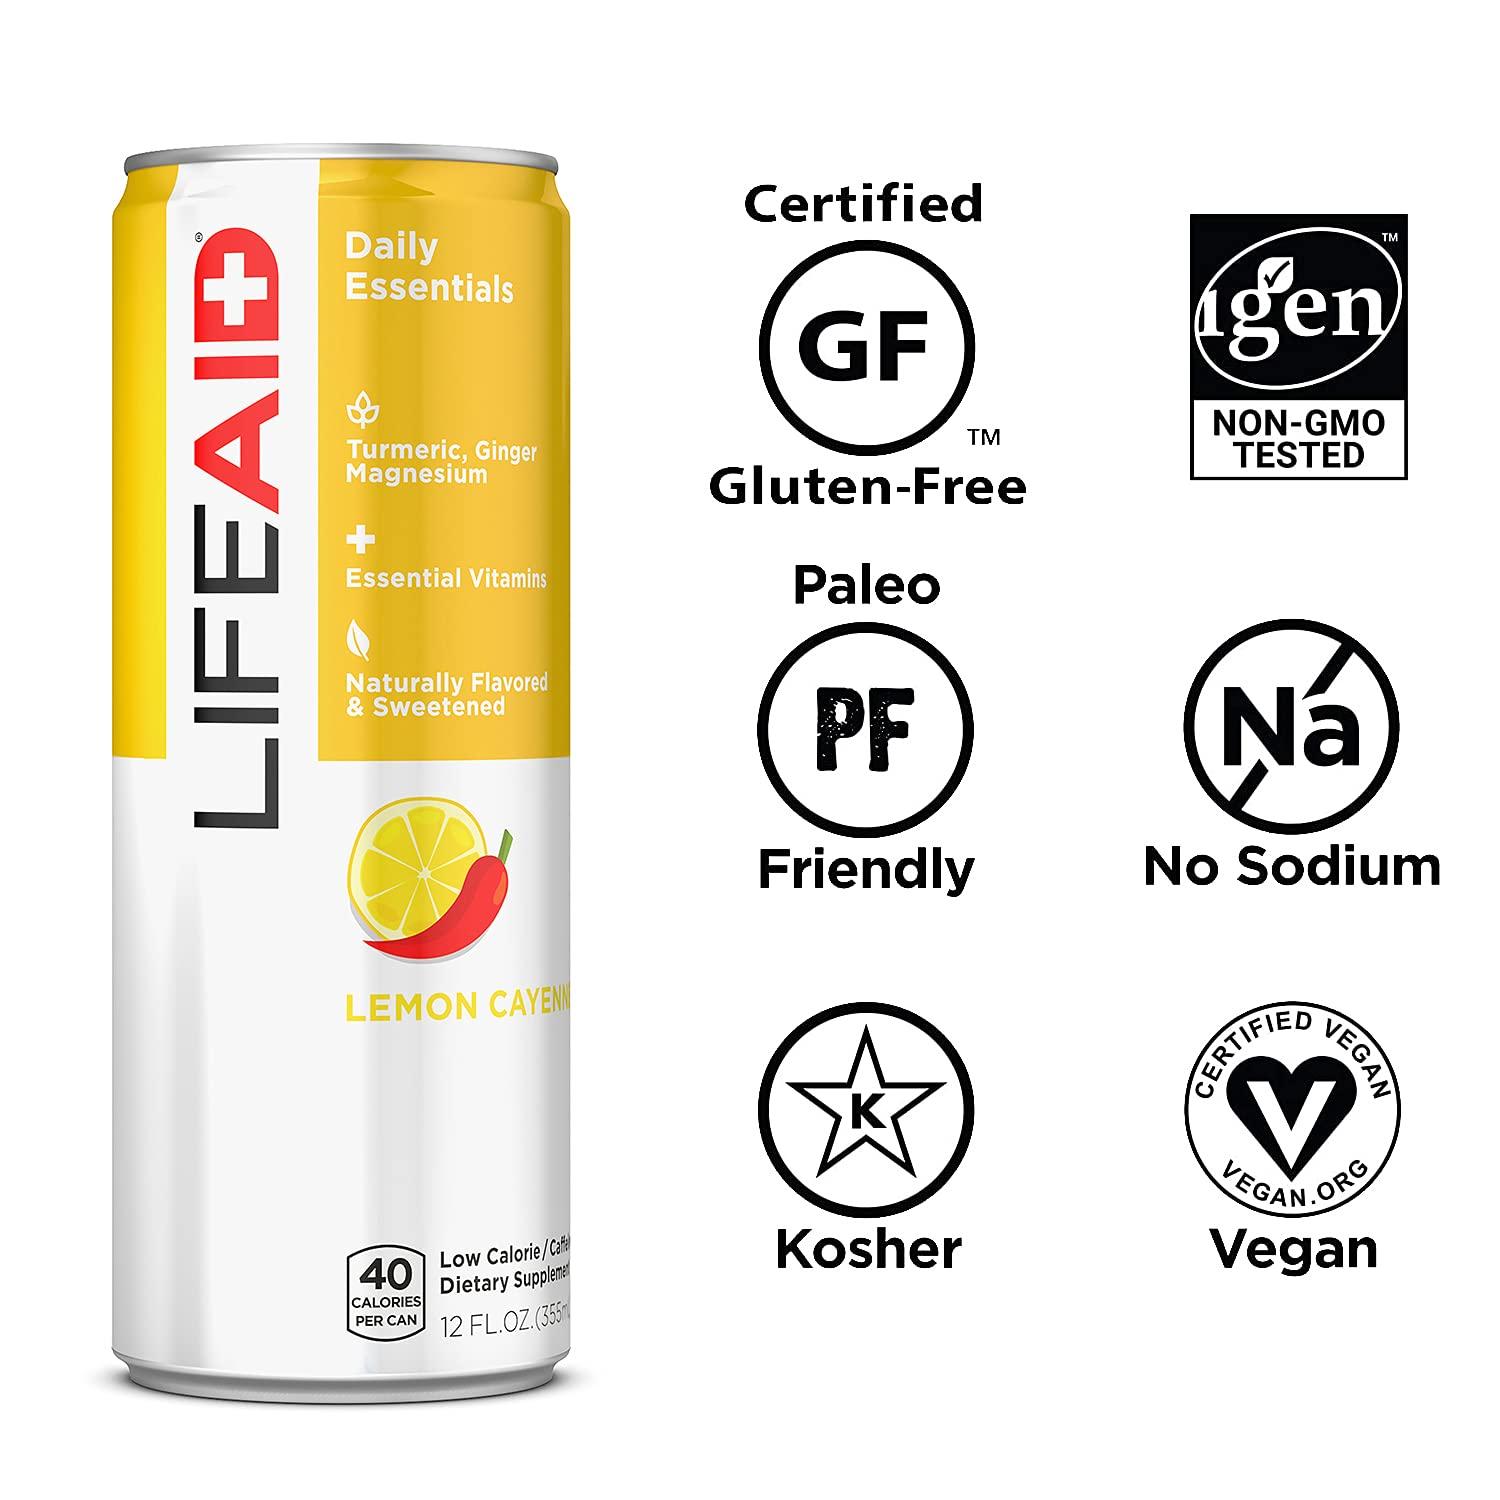 LIFEAID Vitality Blend, Daily Vitamins, Turmeric to Help Reduce Mild  Inflammation from Everyday Stress, Healthy Soda Replacement, 100% Clean,  Vegan, GF, 12-oz. cans (Pack of 12) LIFEAID 12 Fl Oz (Pack of 12)